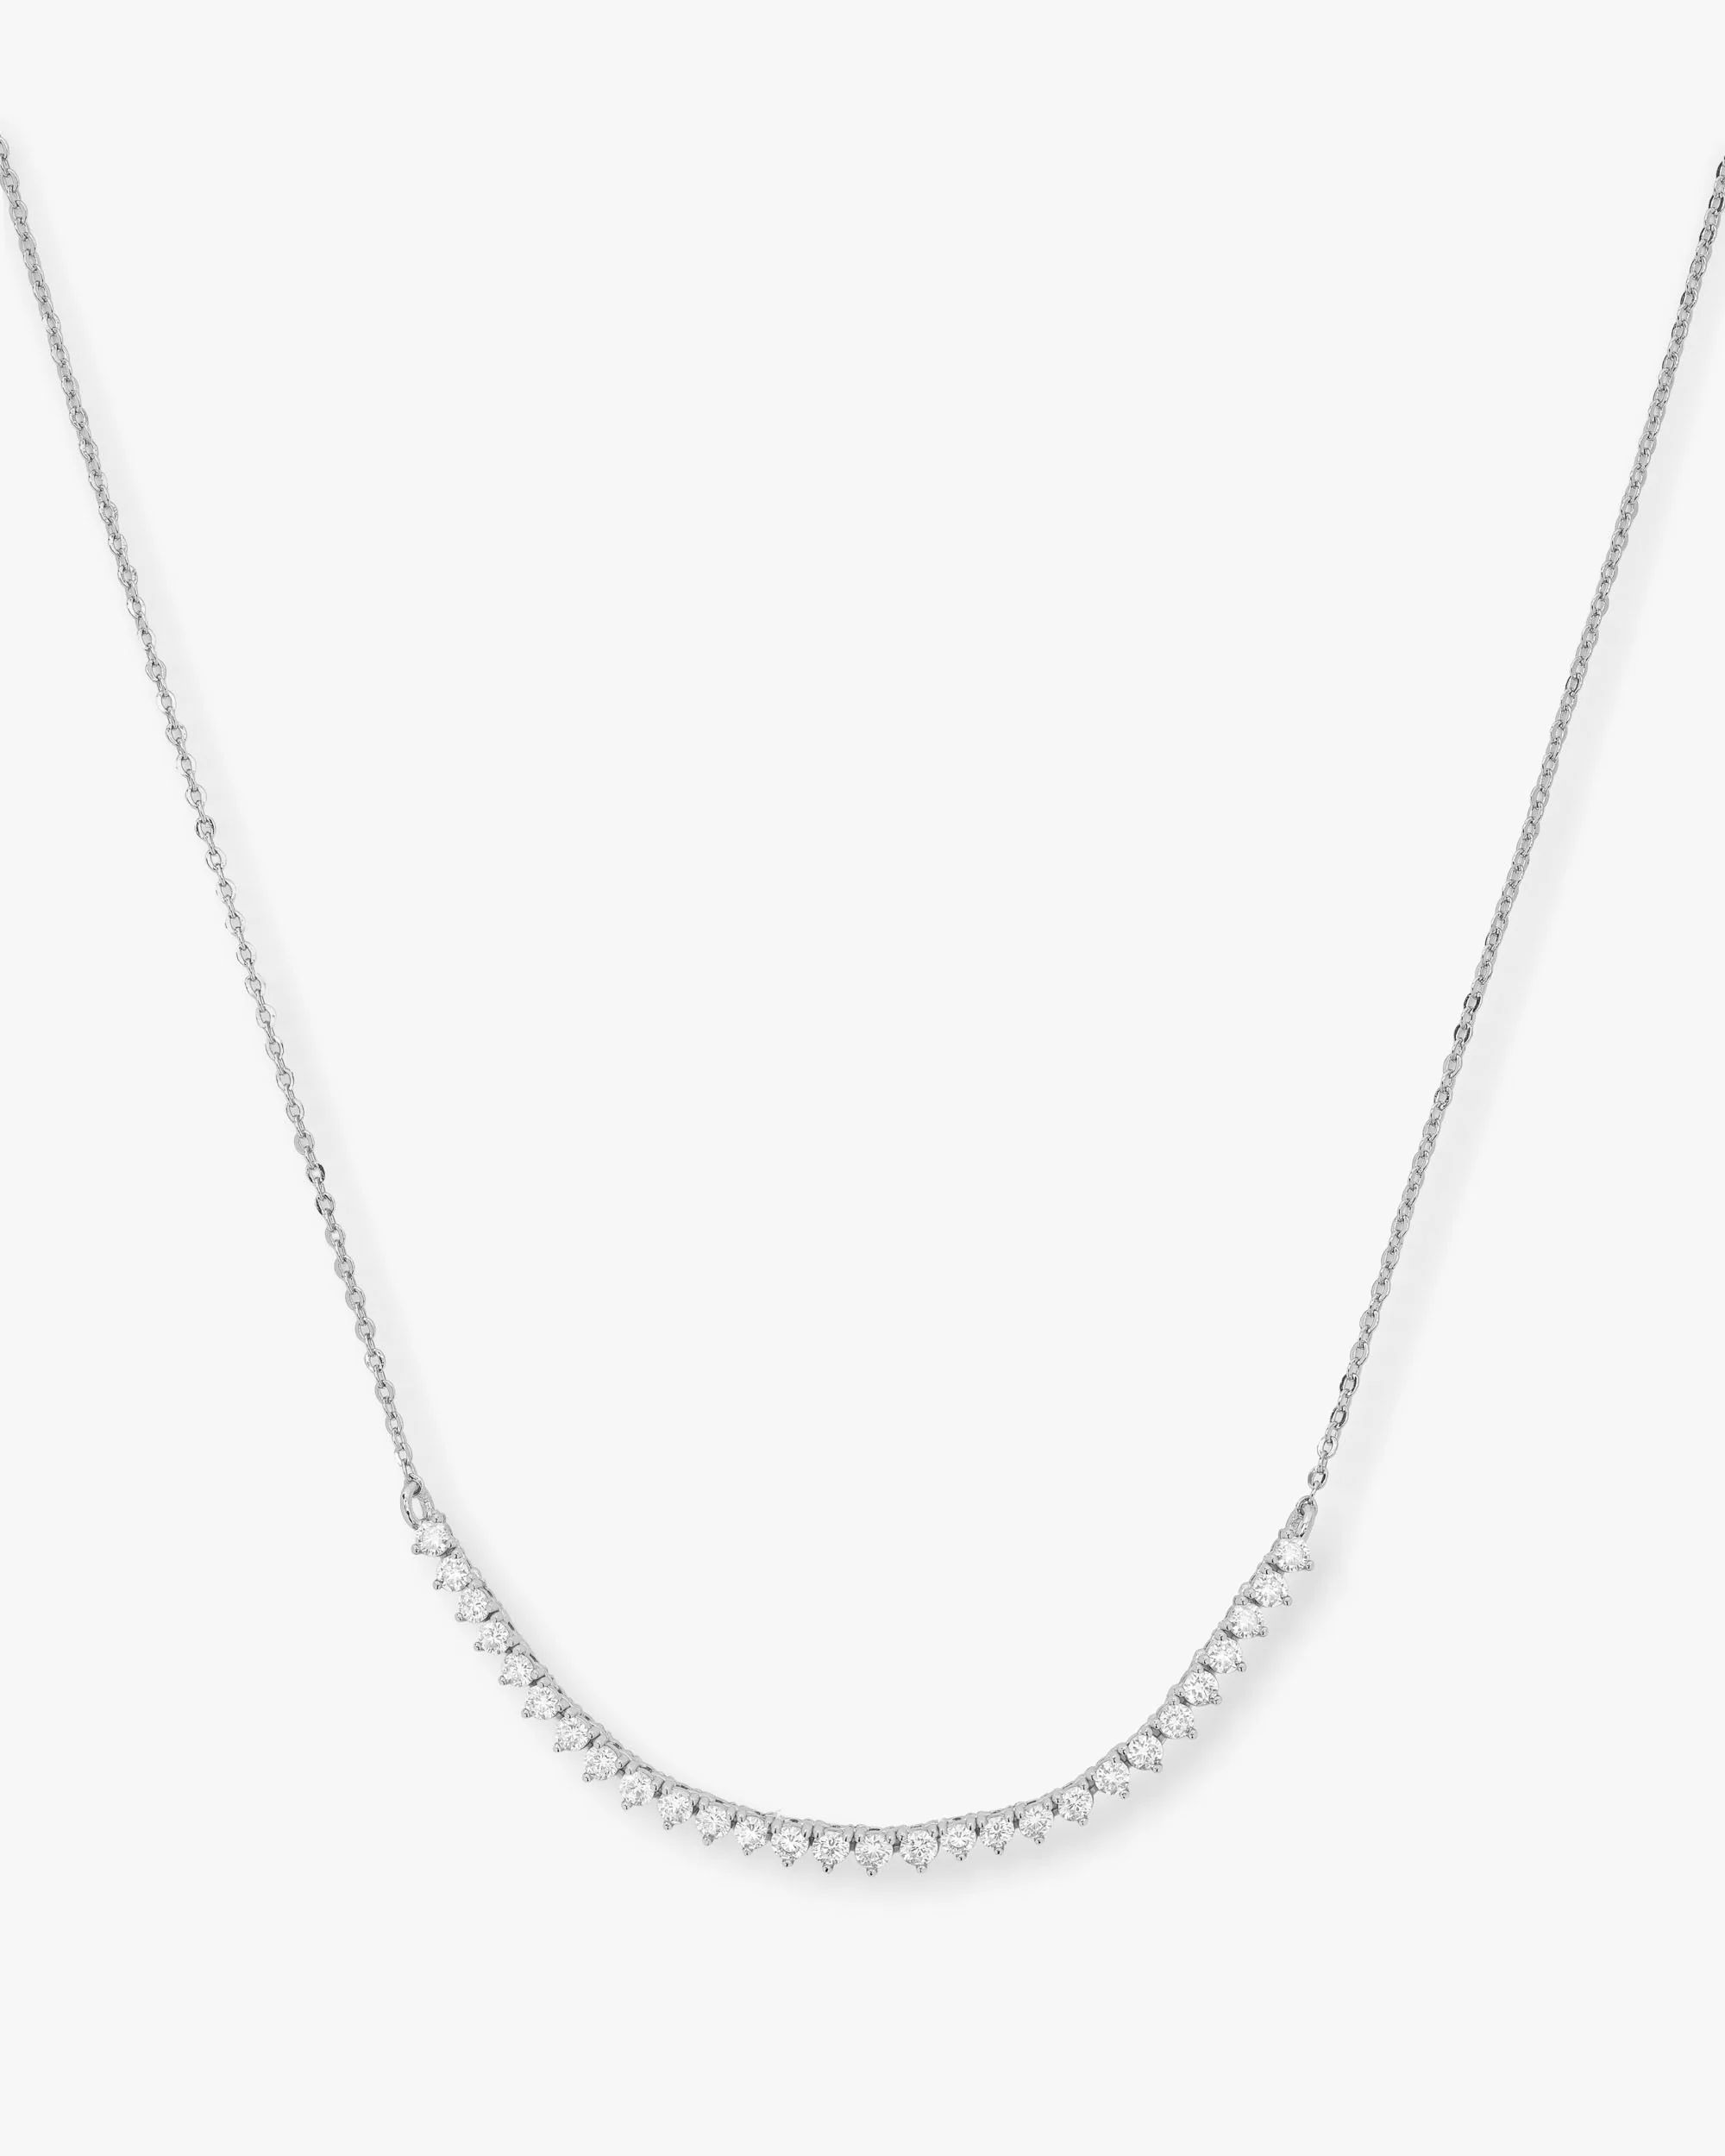 Baby Not Your Basic Tennis Chain Necklace - Silver|White Diamondettes | Melinda Maria